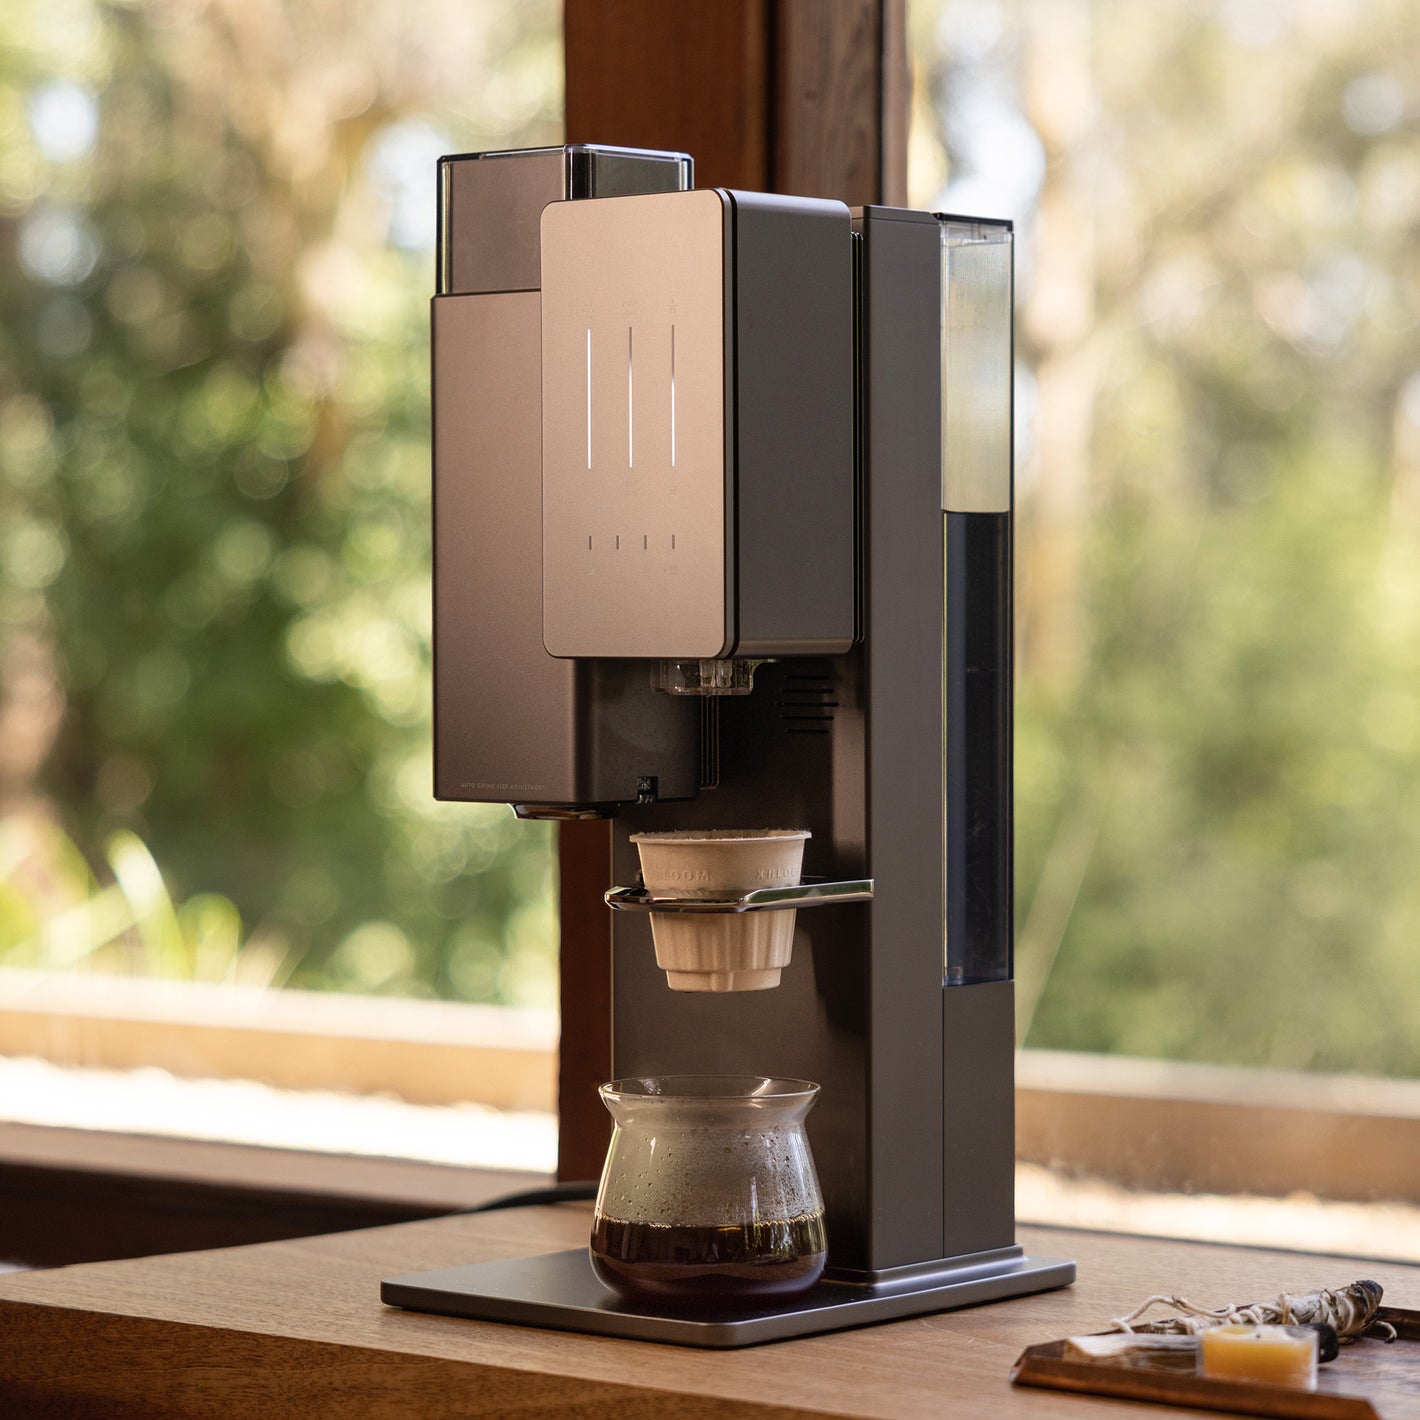 xBloom - Your home coffee, professionally made